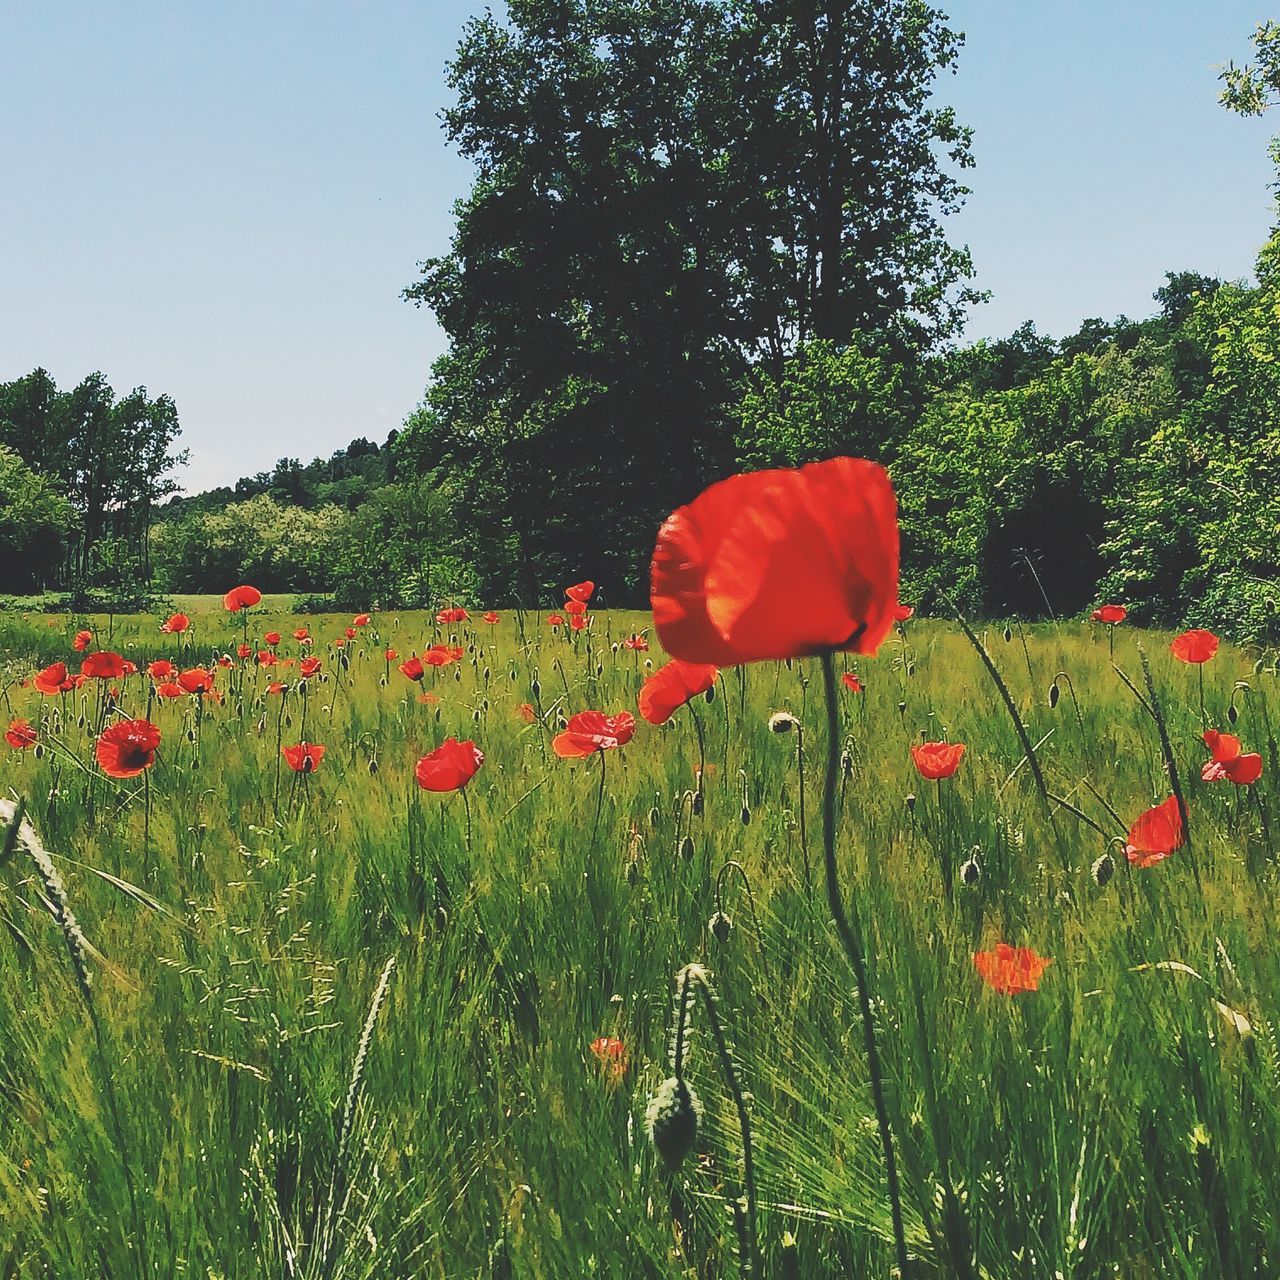 flower, growth, freshness, red, field, beauty in nature, clear sky, nature, plant, tree, grass, fragility, green color, tranquility, poppy, tranquil scene, landscape, blooming, sky, agriculture